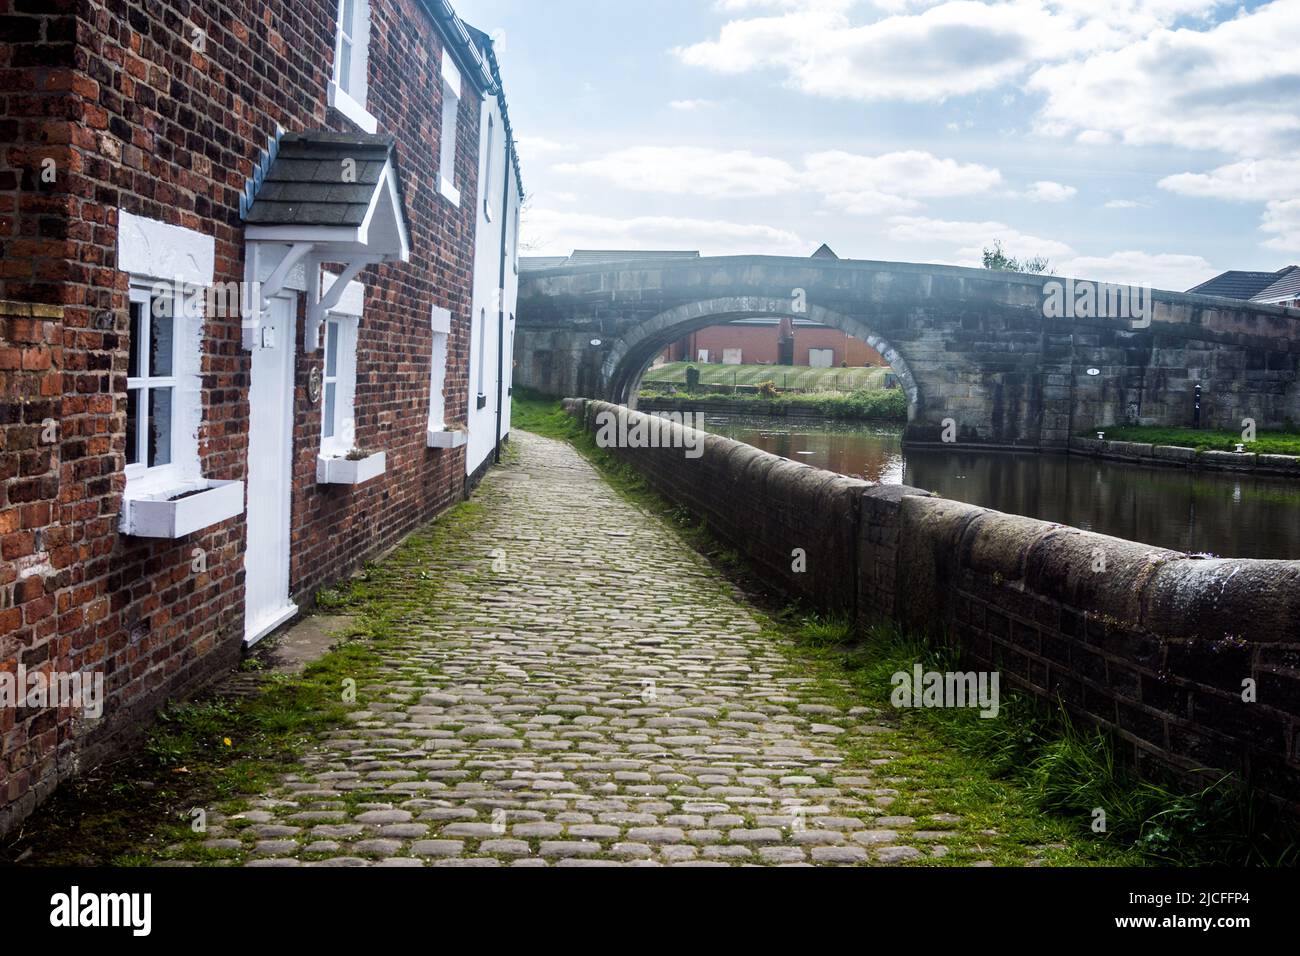 Terraced houses at the start of the Rufford branch of the Leeds - Liverpool canal. Stock Photo